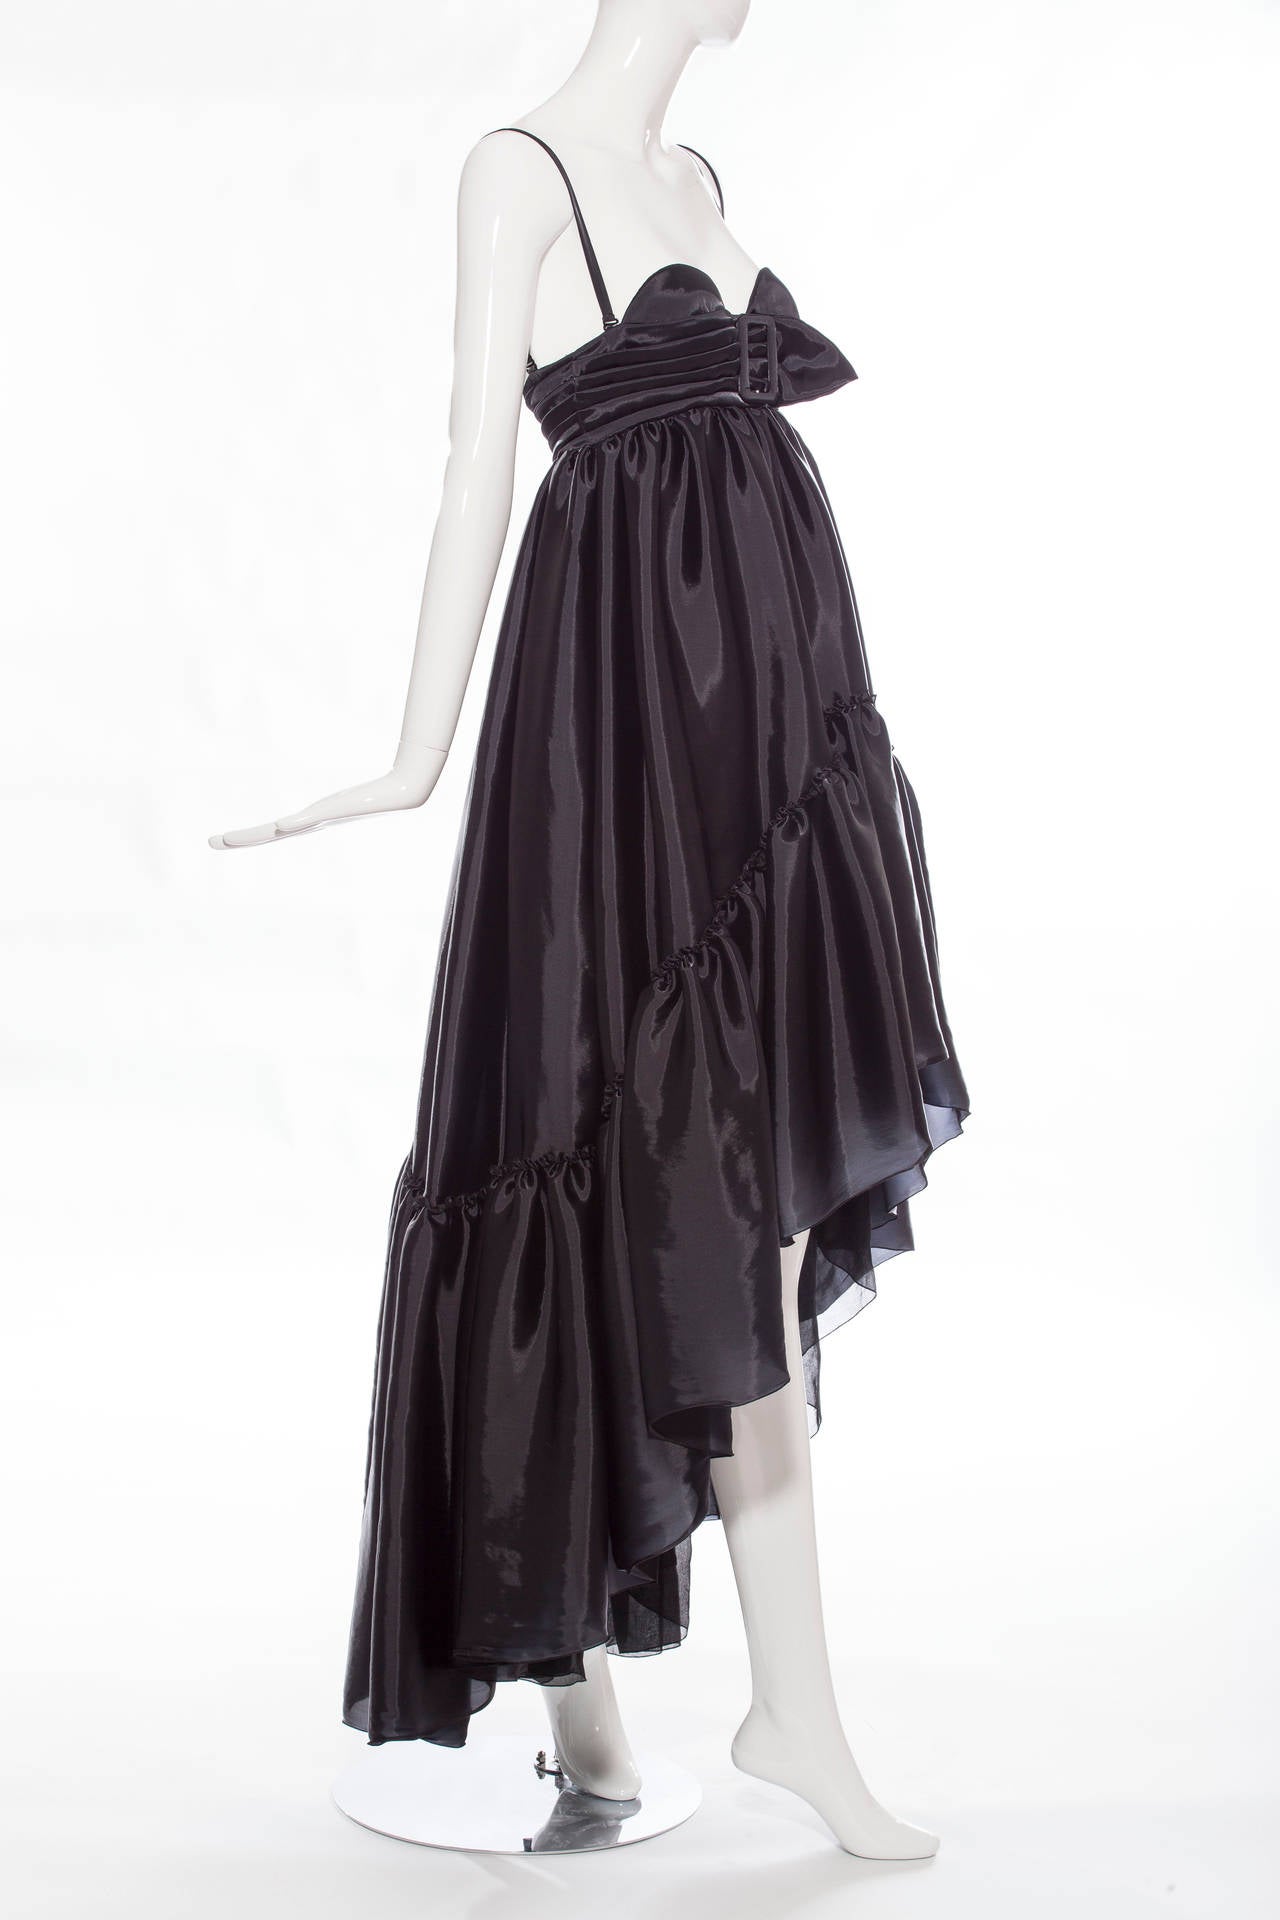 Jean Paul Gaultier, circa 1990s sleeveless gown with empire waist, tiered ruffled panels at hem, built-in bra featuring pleated accents, adjustable straps and hook and eye closures at center back.

Bust 28